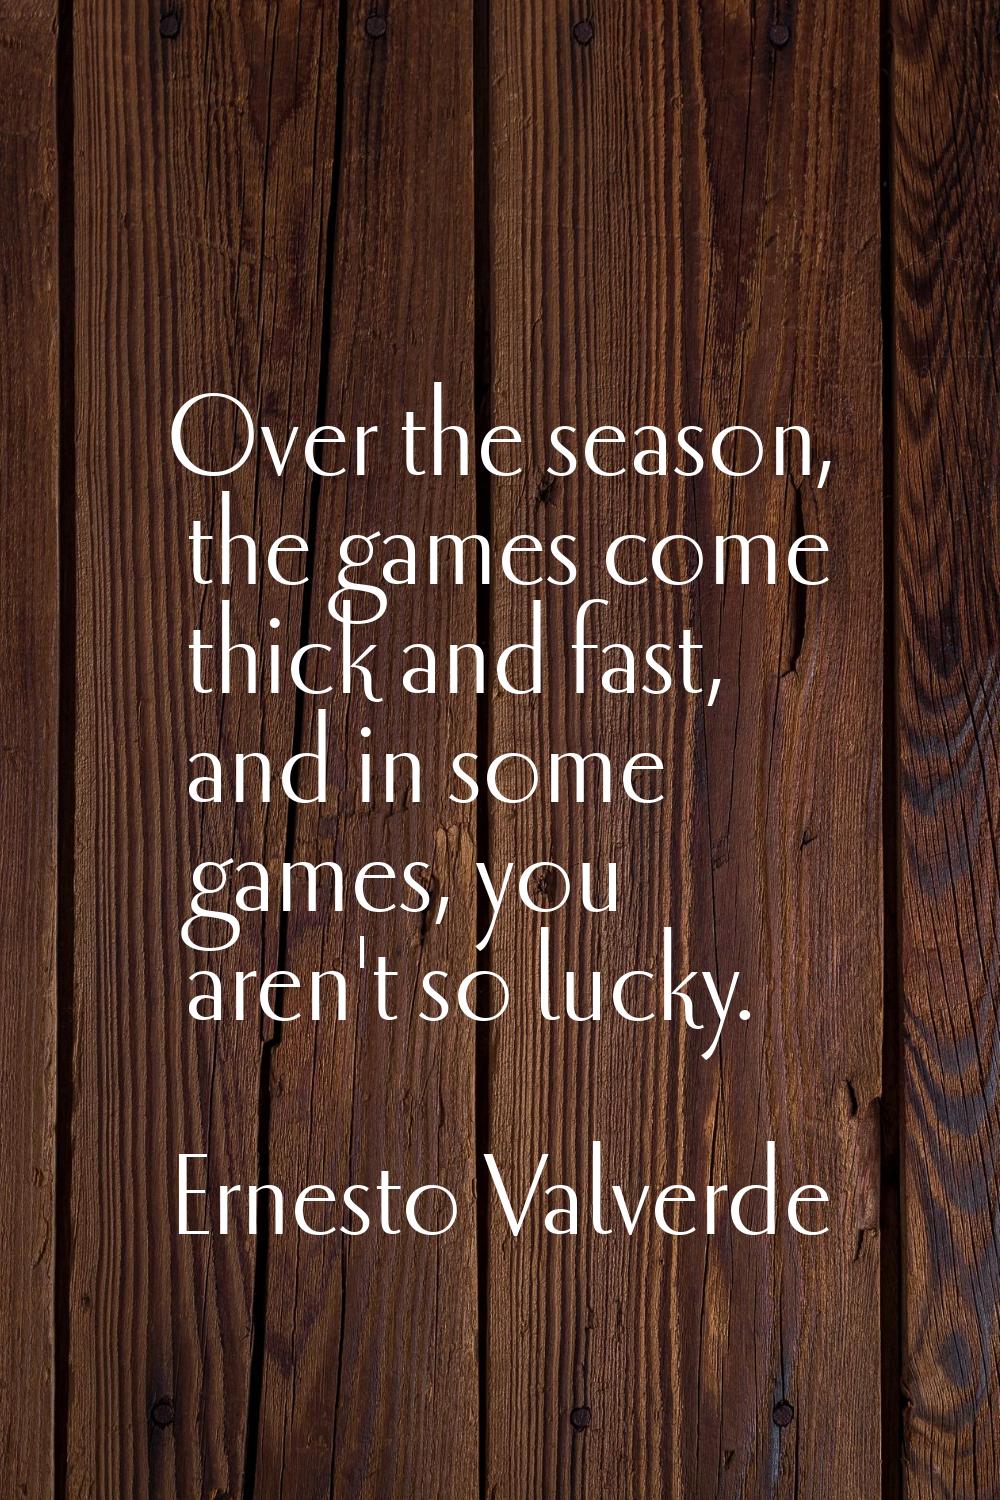 Over the season, the games come thick and fast, and in some games, you aren't so lucky.